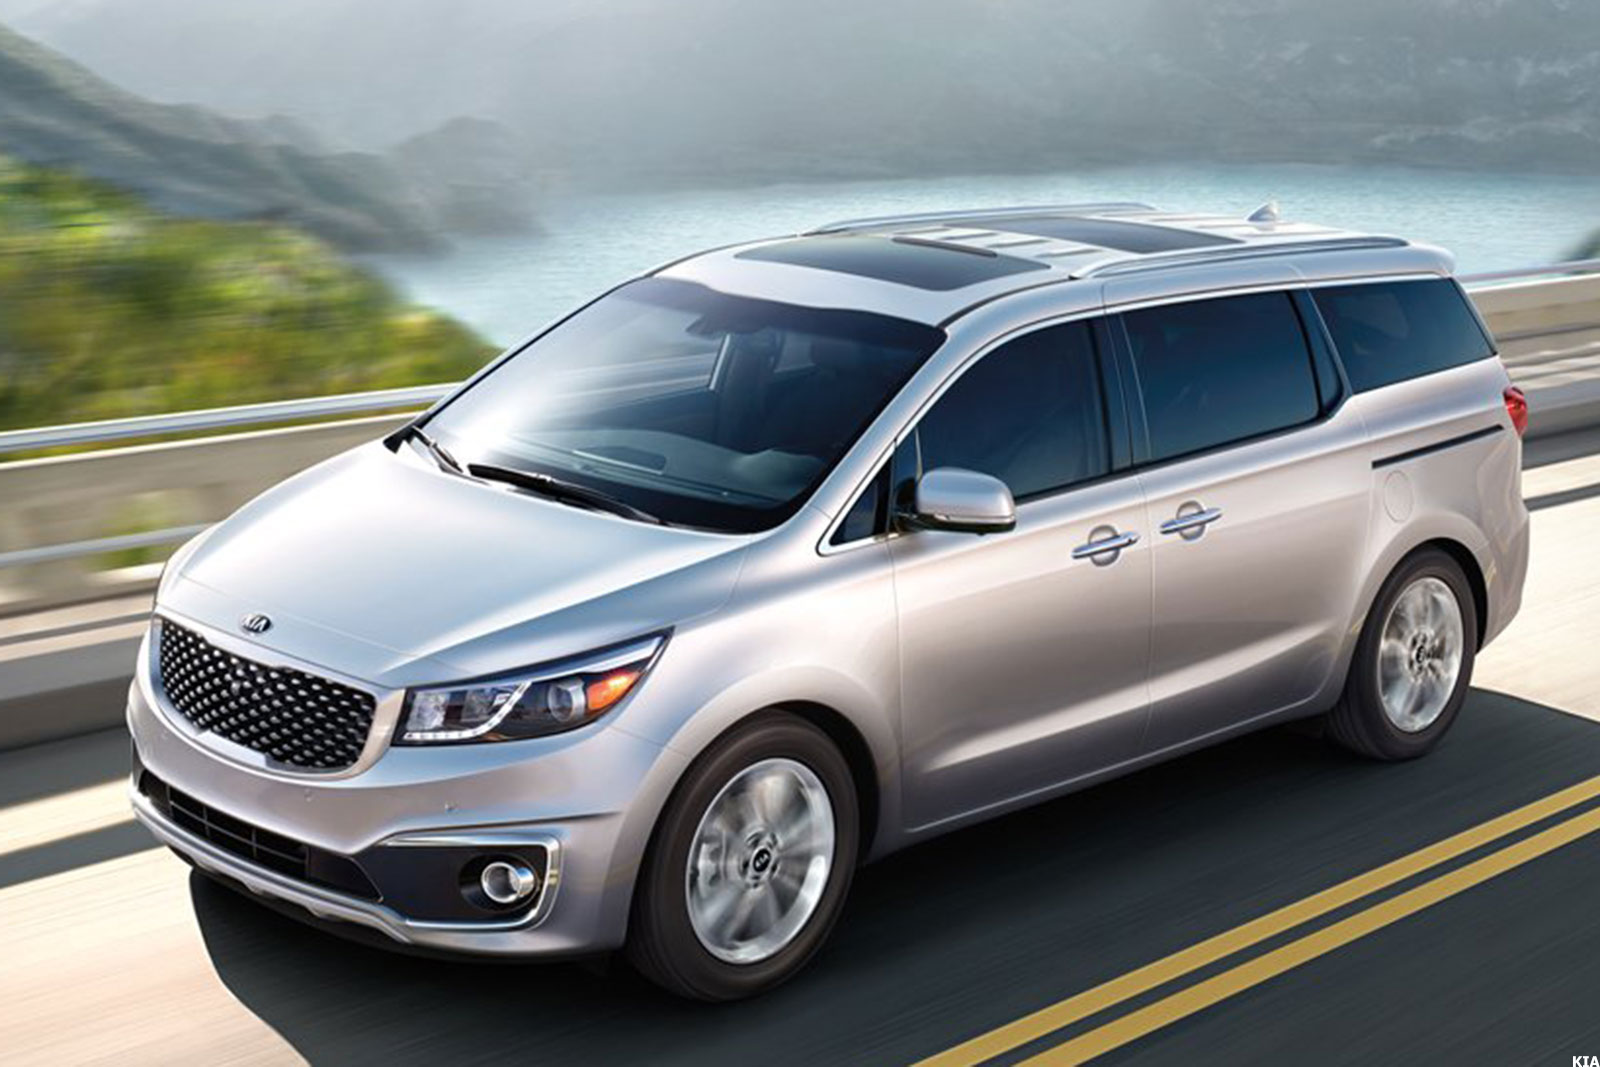 A family mover with attitude. Kia Reinvented the Minivan Into a Stylish Luxury Car